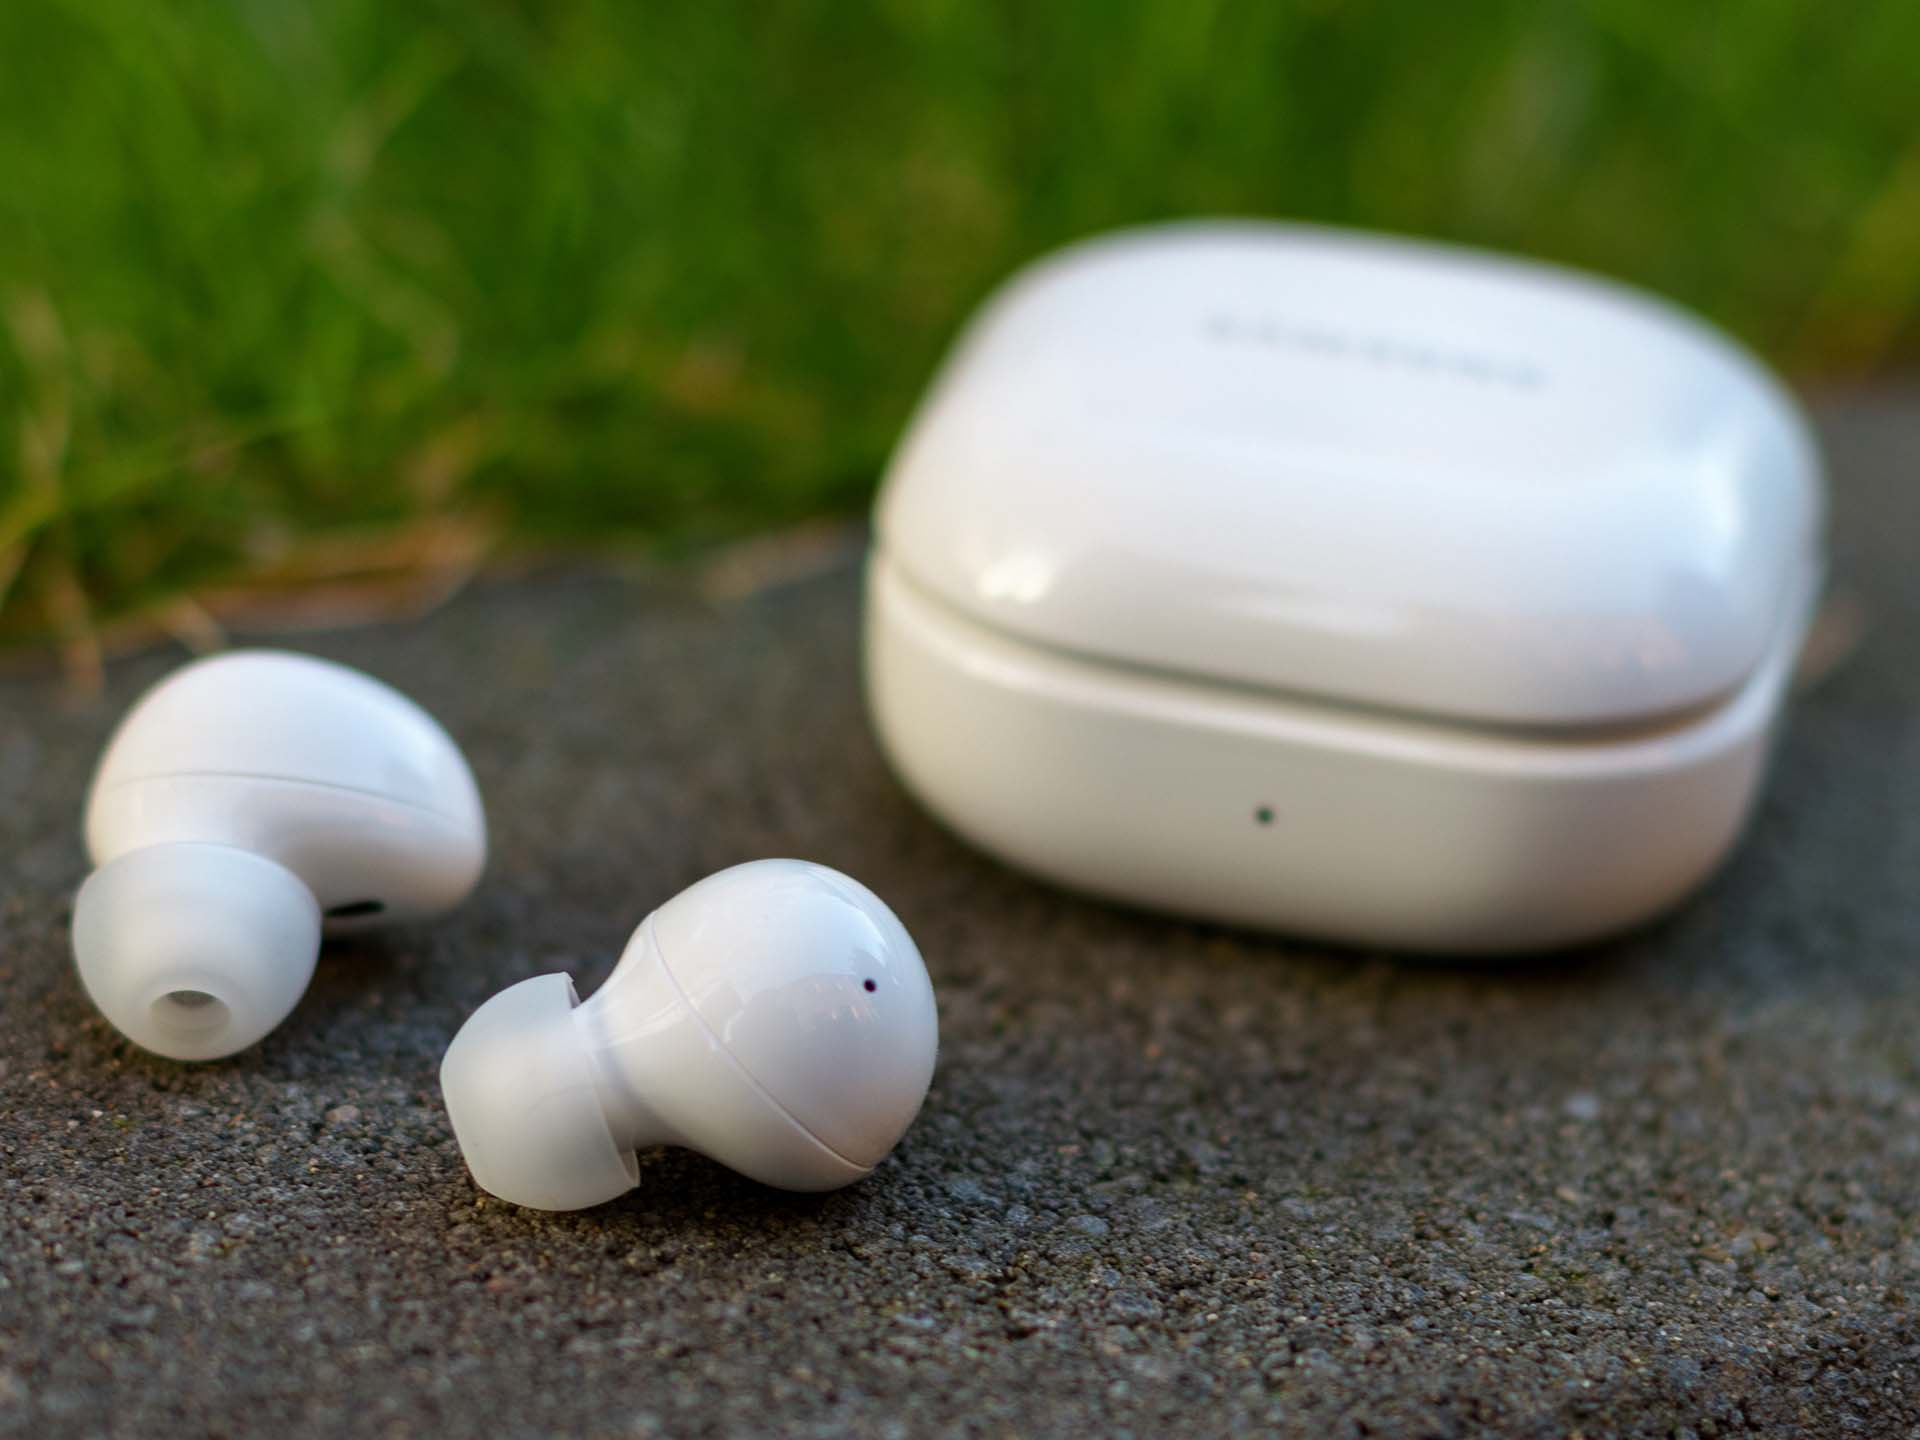 Samsung Galaxy Buds2 review - Powerful in-ear headphones with ANC -  NotebookCheck.net Reviews